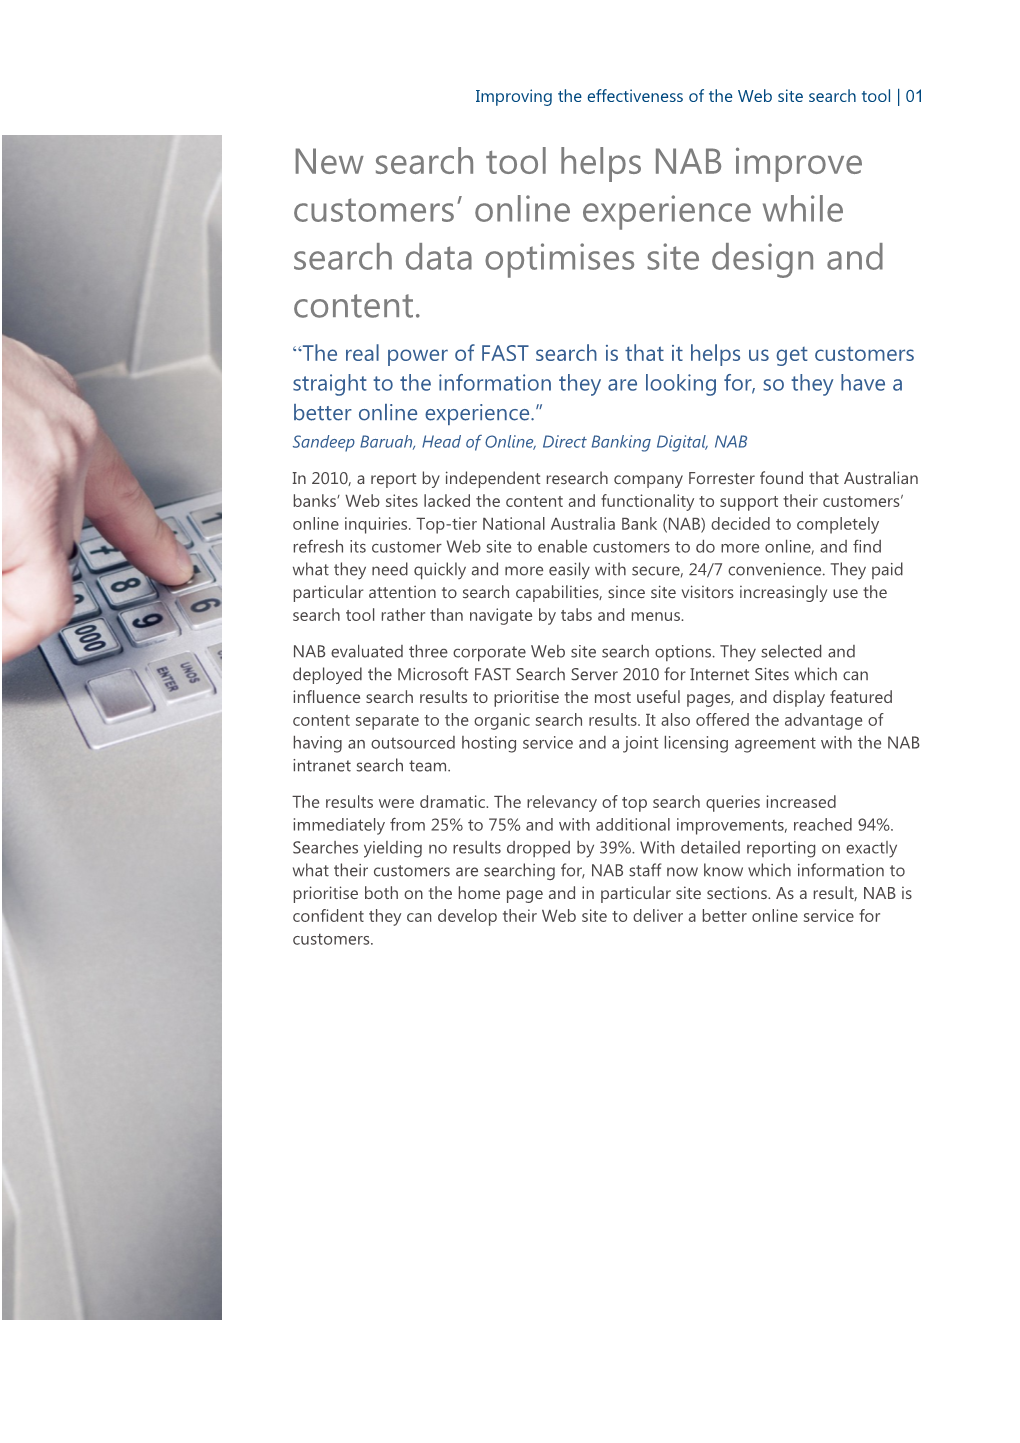 New Search Tool Helps NAB Improve Customers Online Experience While Search Data Optimises